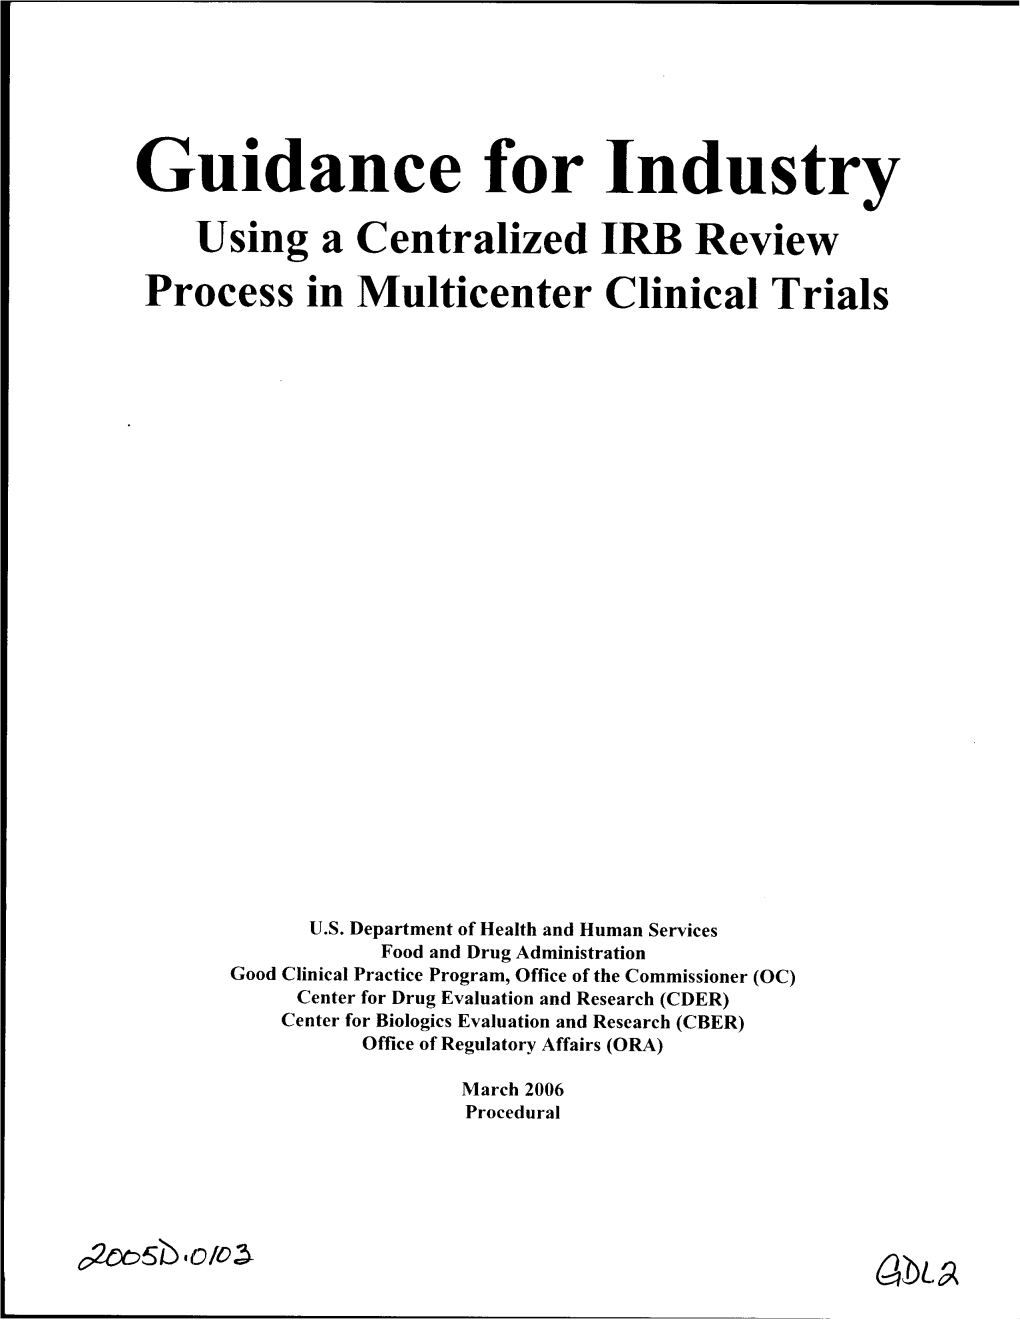 Gul* Dance for Industry Using a Centralized IRB Review Process in Multicenter Clinical Trials